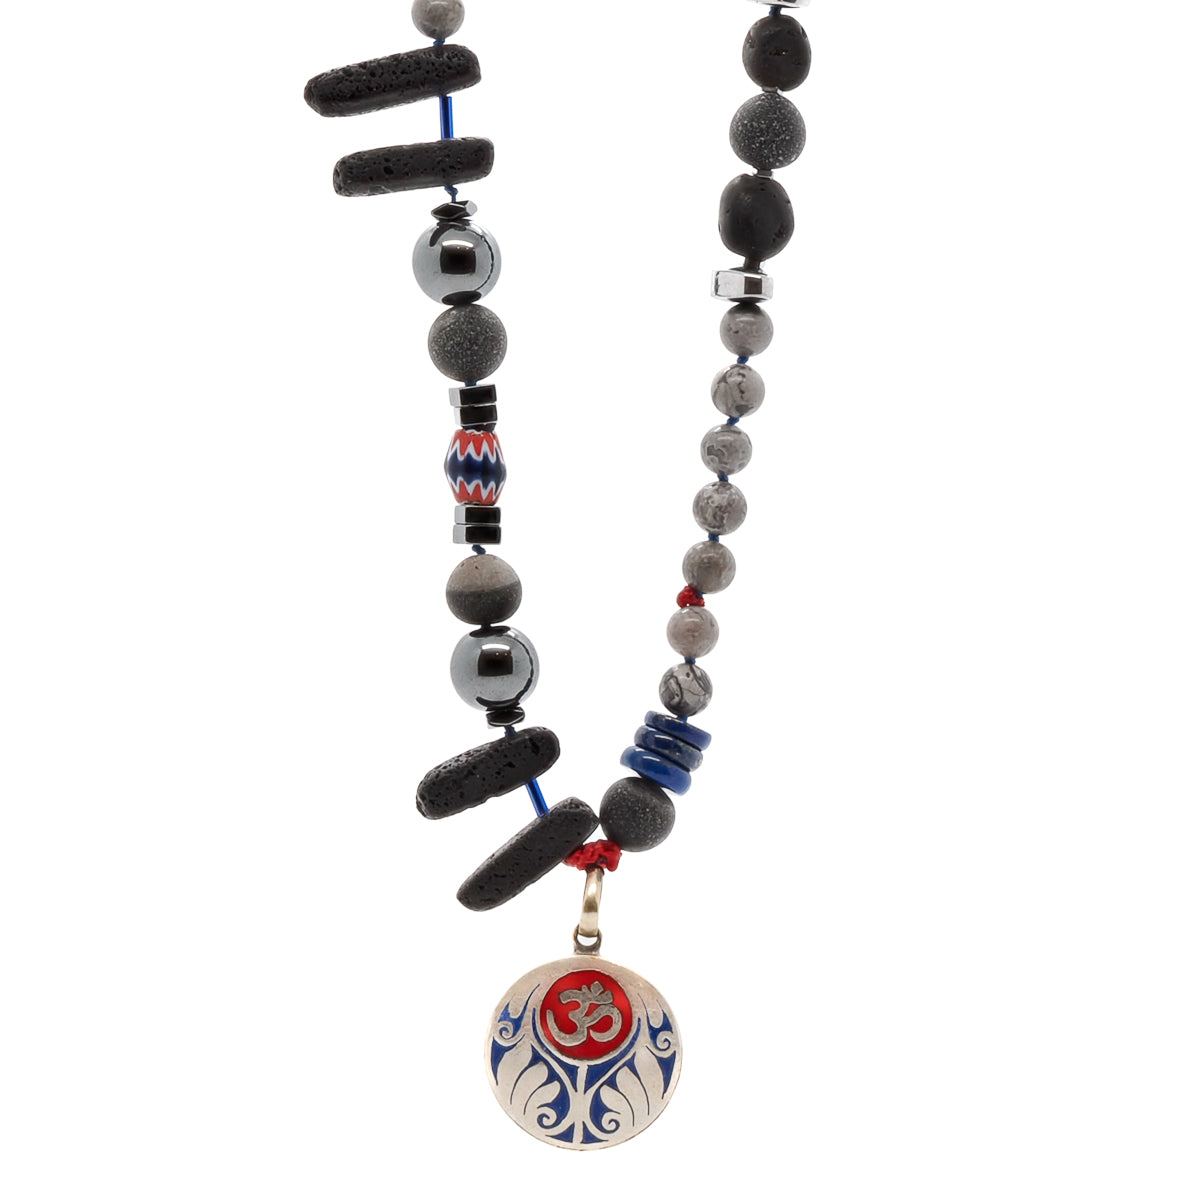 The Tibetan Om Necklace is a stunning piece of jewelry that combines various natural materials to create a unique and stylish accessory.